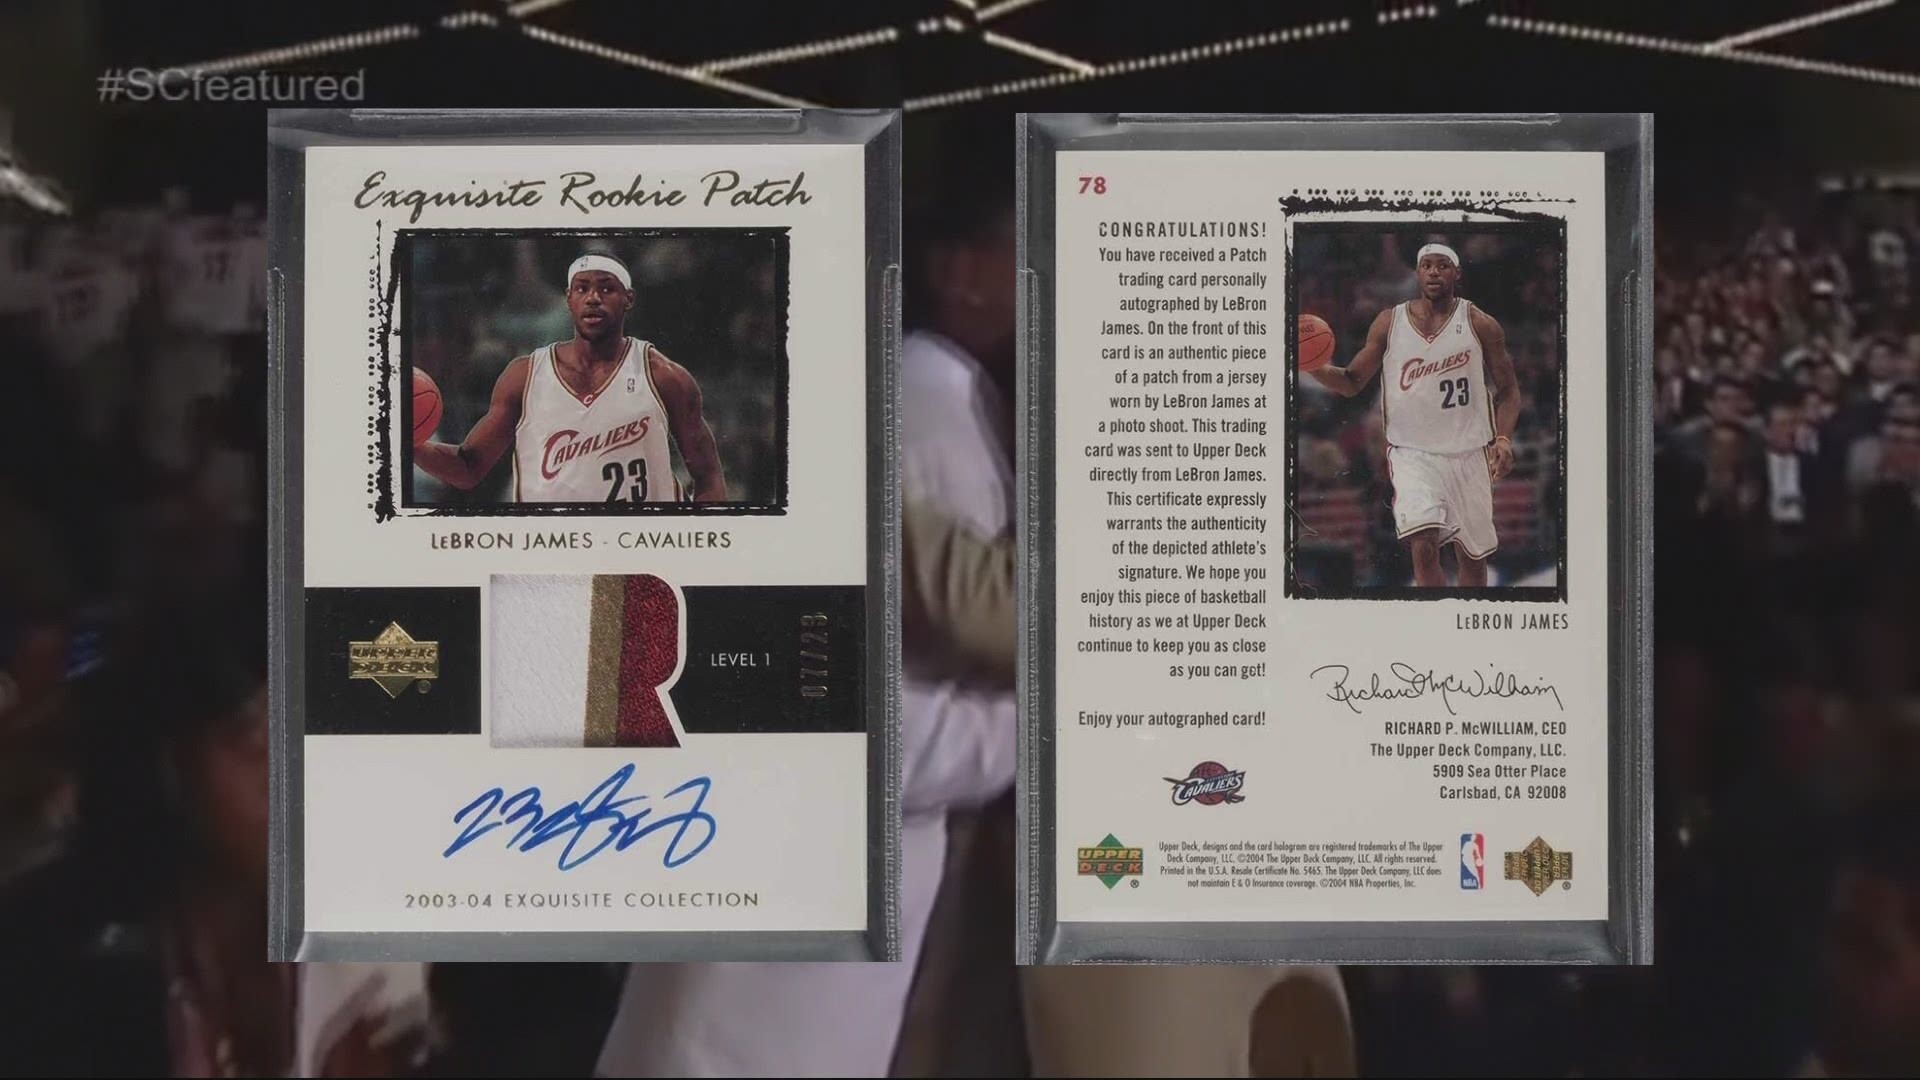 The year was 2003. LeBron James was the No. 1 pick in the NBA draft and Upper Deck printed 23 LeBron James rookie patch autograph cards from its Exquisite Collection